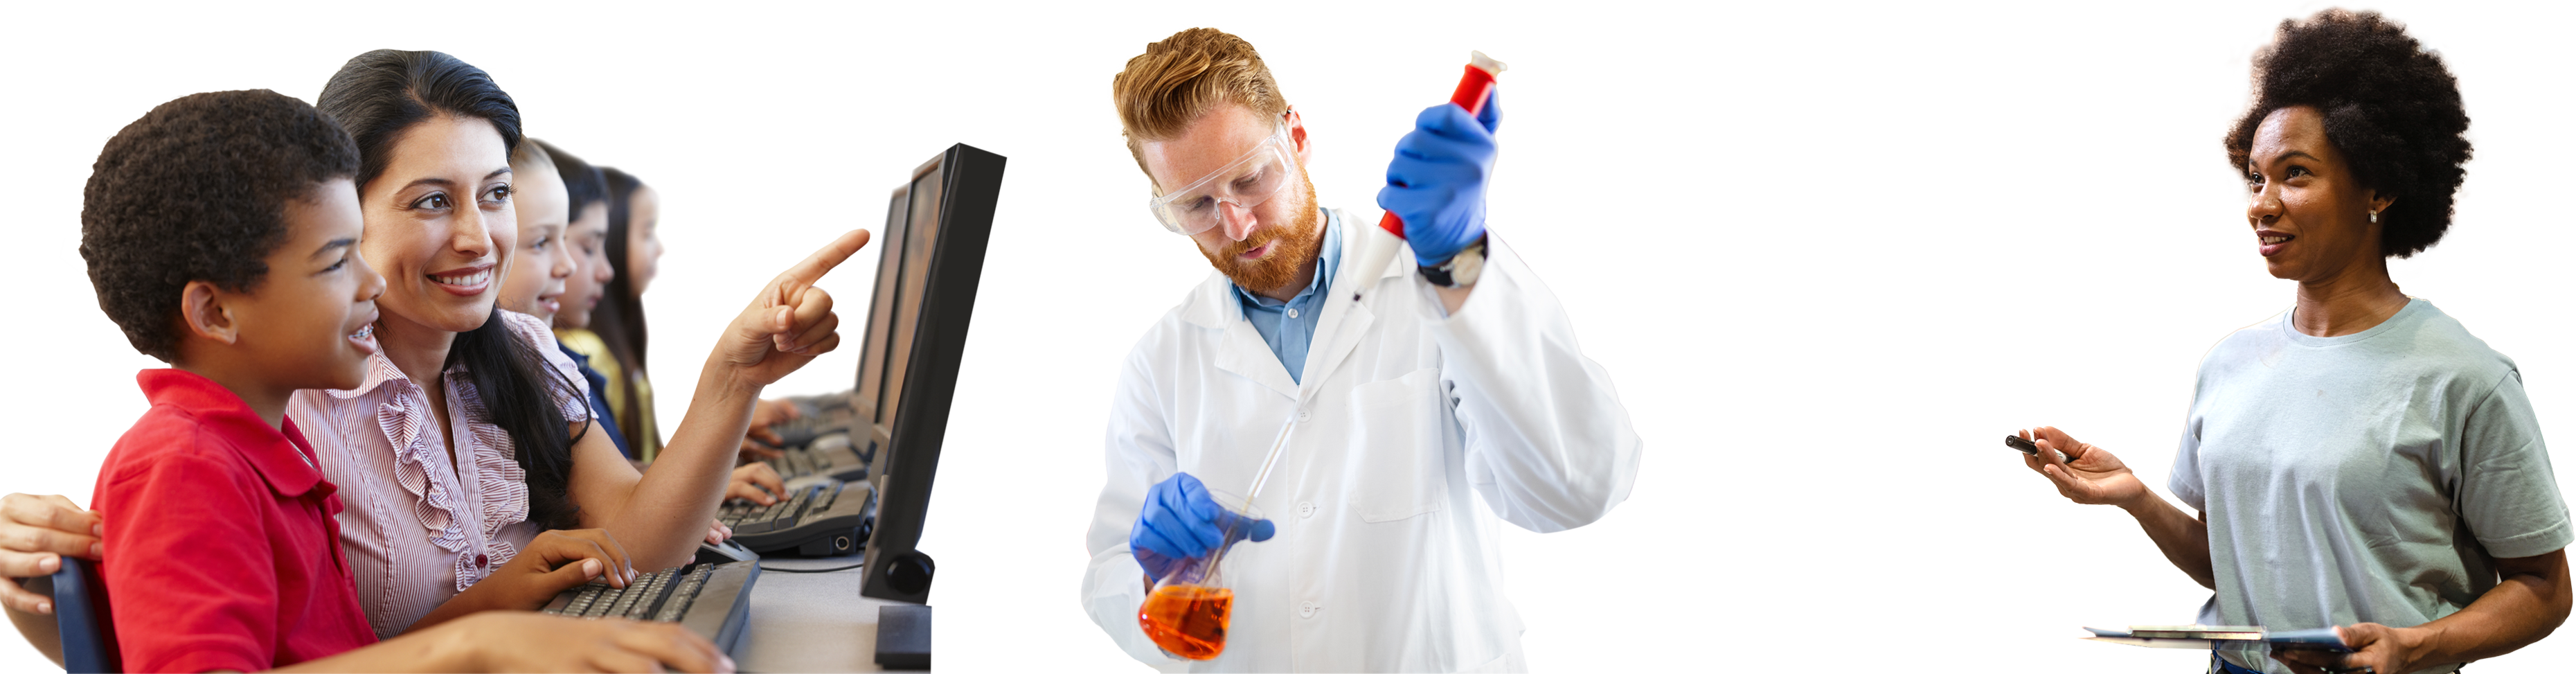 A male scientist holding a flask and working with chemicals